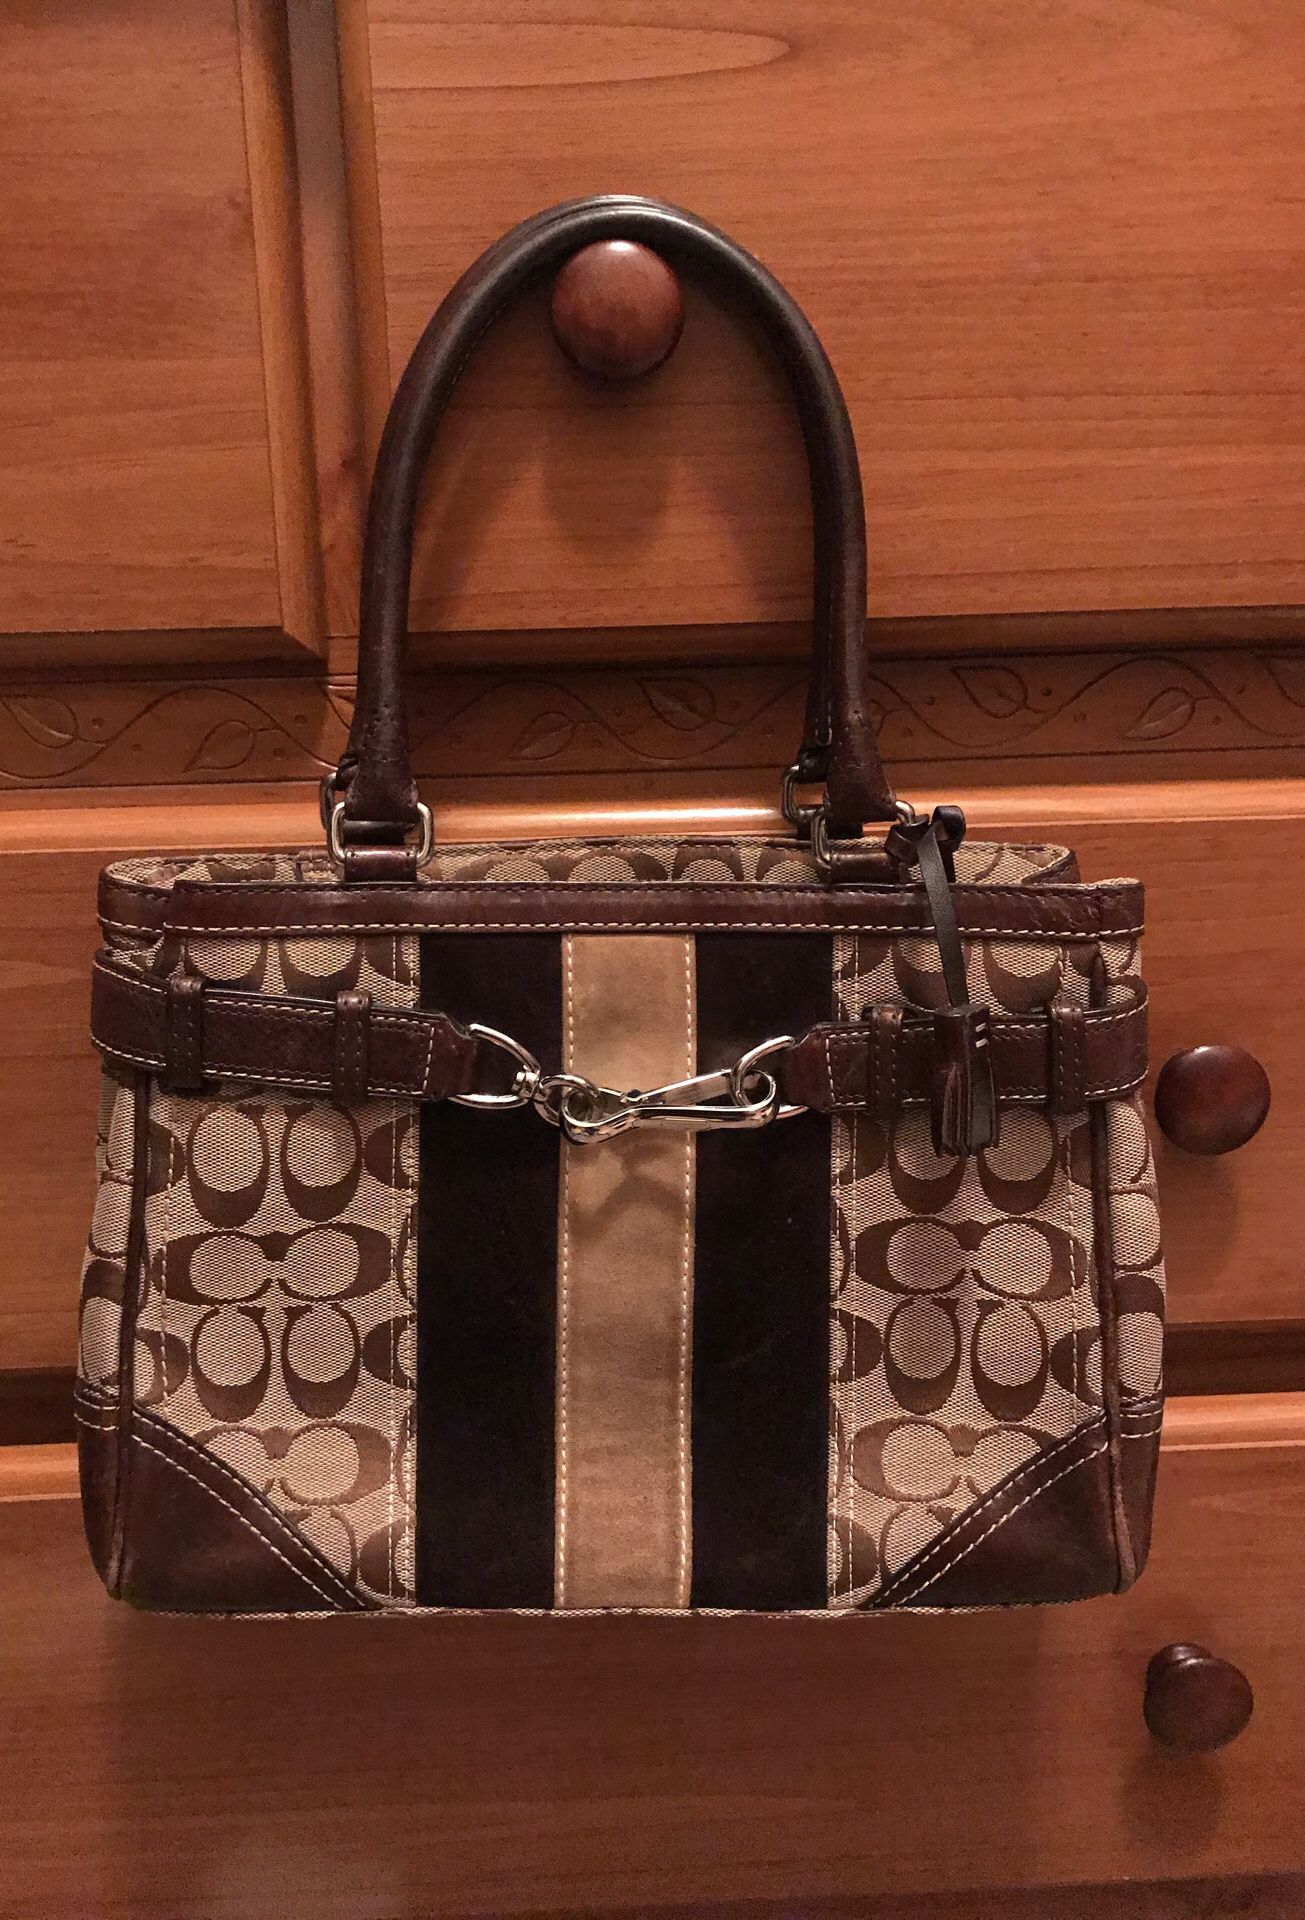 Vintage Coach purse in great condition